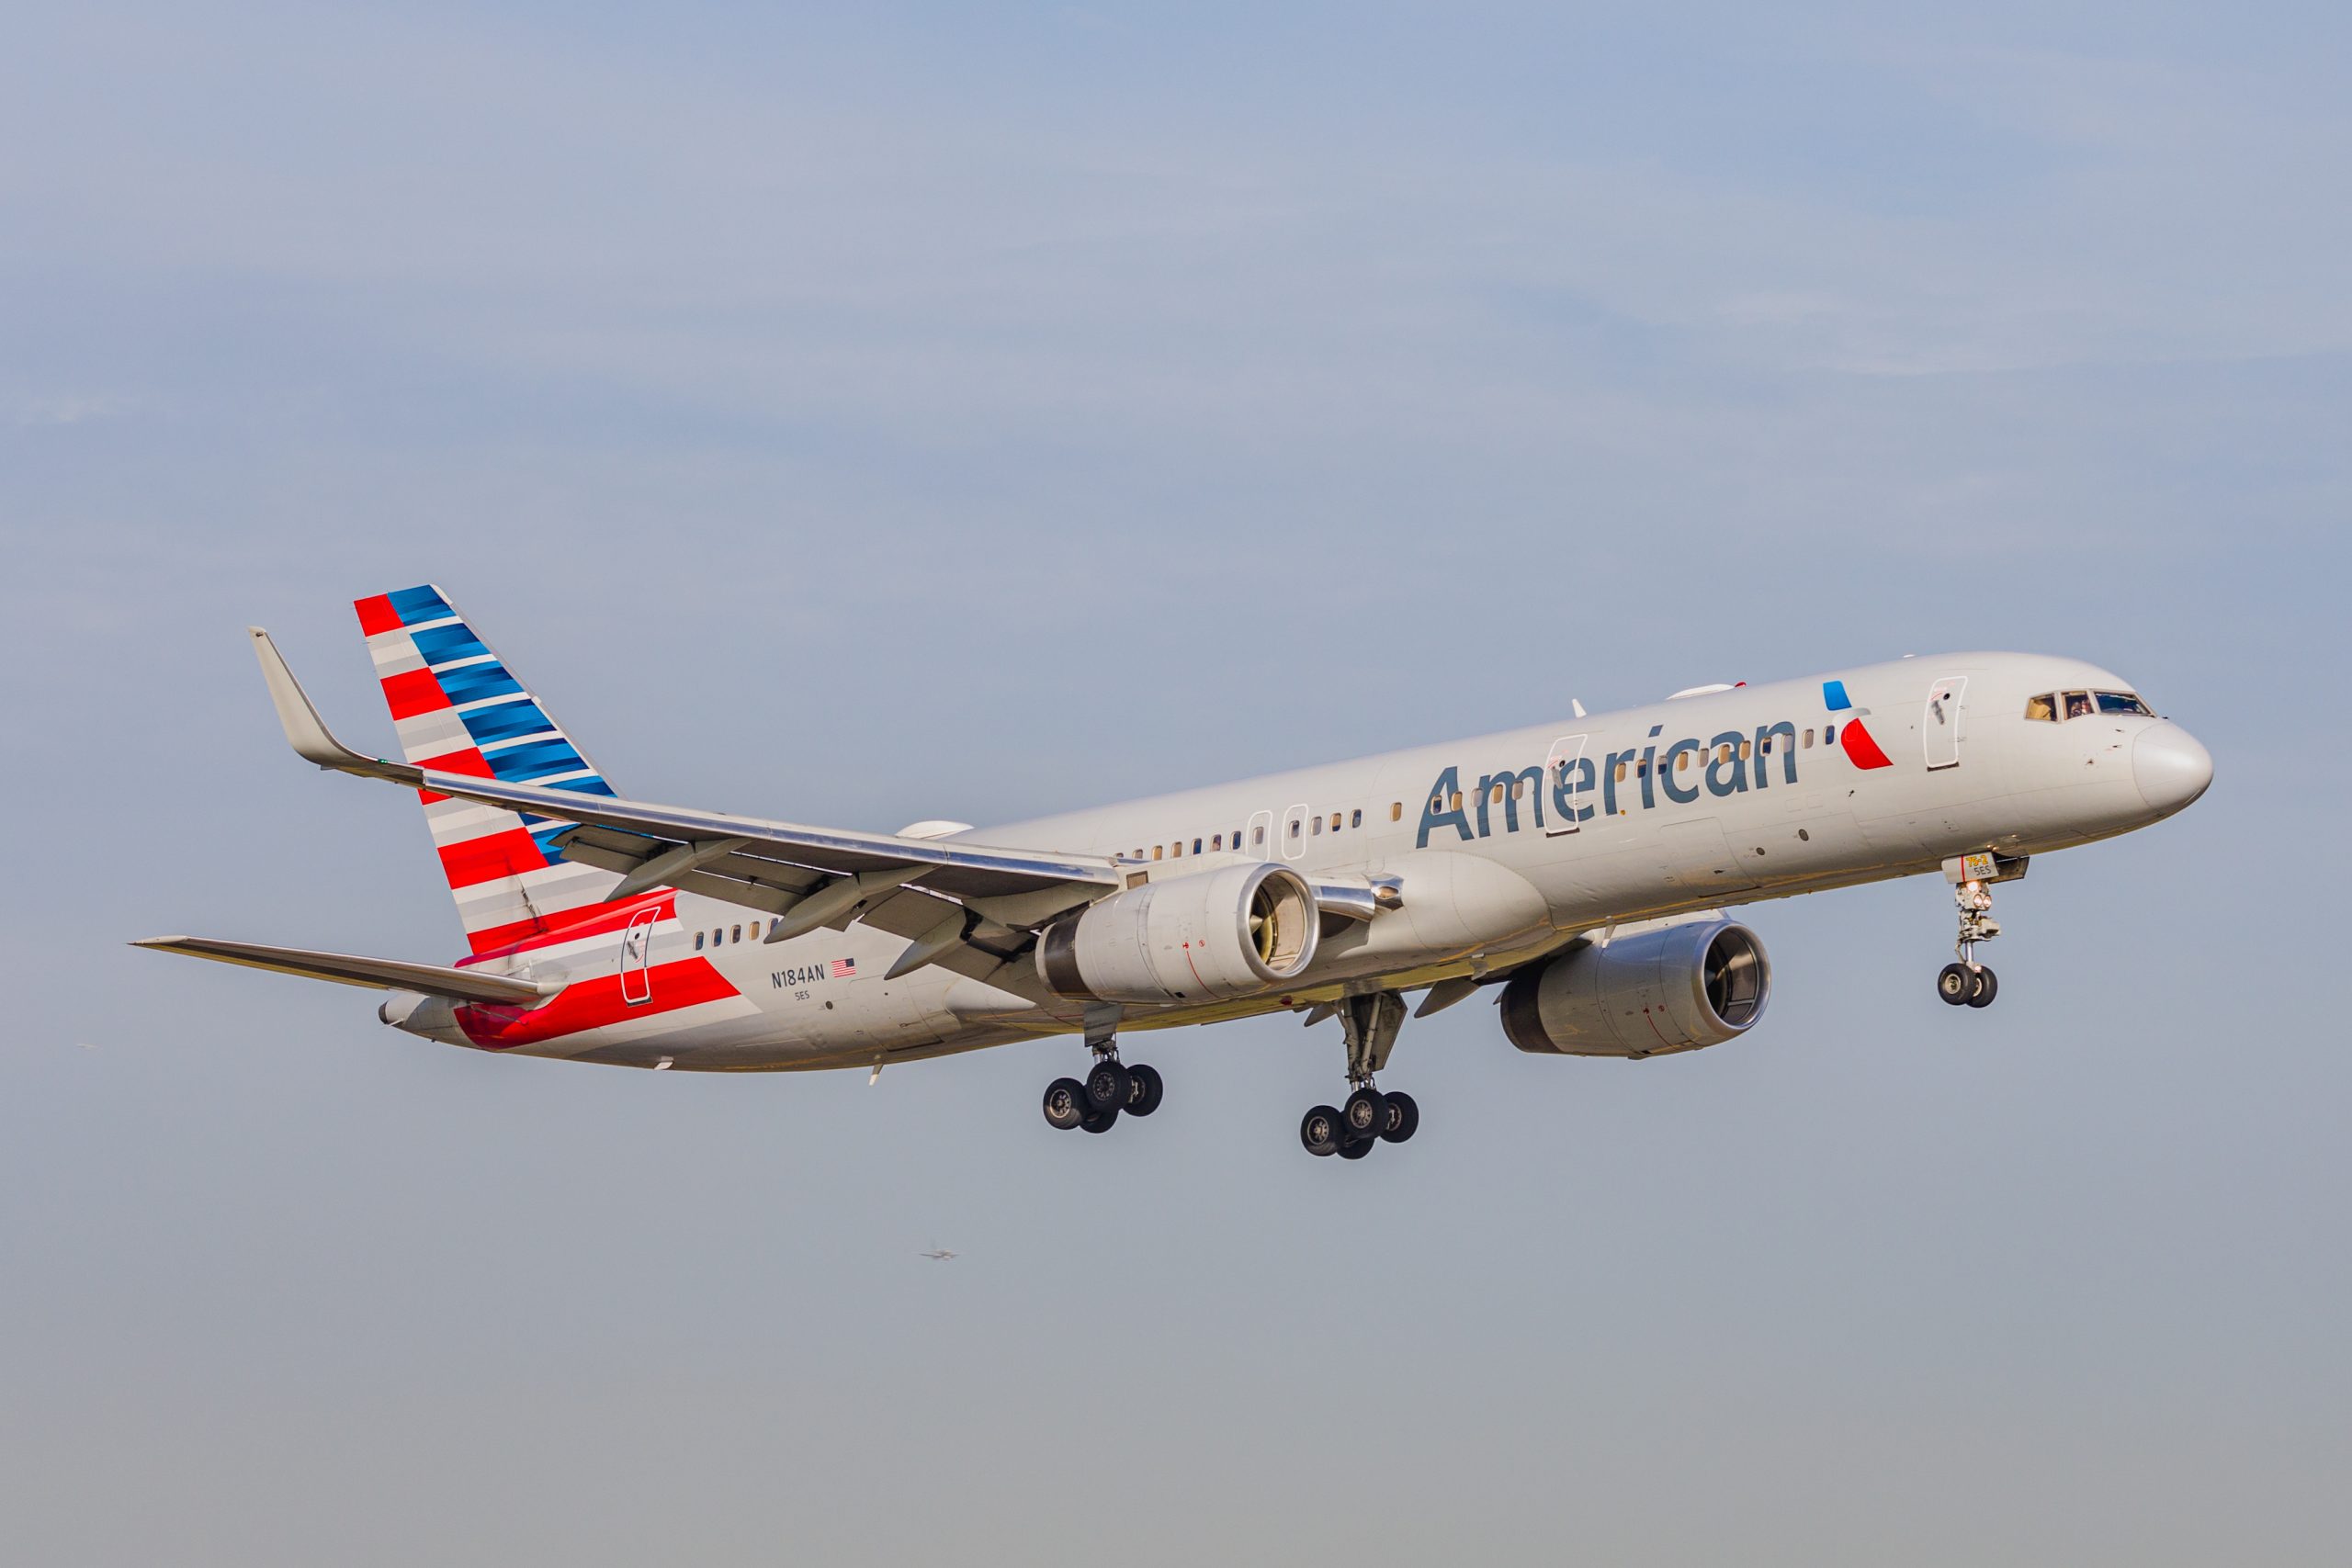 Unruly Passenger Ordered to Pay American Airlines 8,000 in Restitution